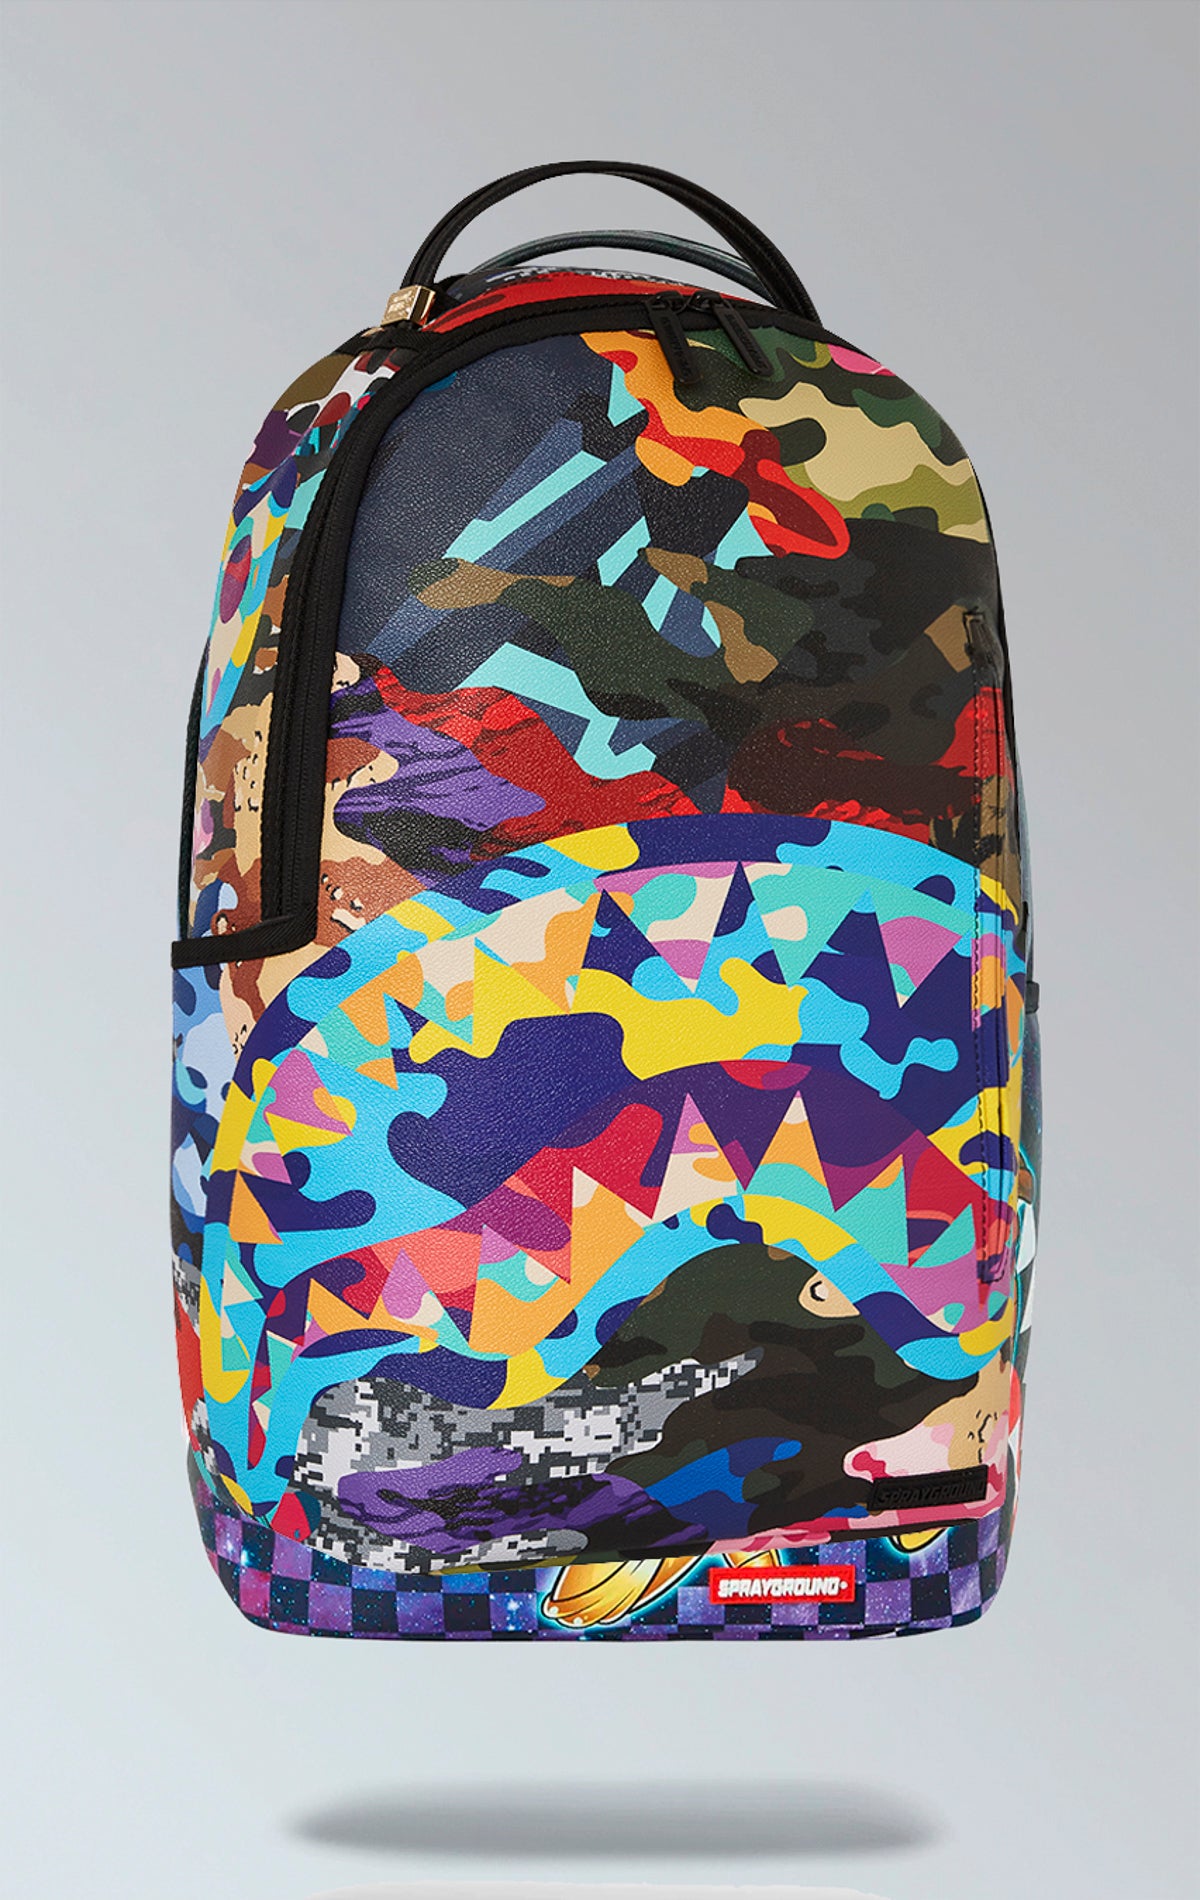 Sprayground Sliced & Dice Camo Backpack. The backpack is made from durable faux leather (100% PVC) in a camouflage print and features a variety of pockets, a separate velour sunglass compartment, ergonomic mesh back padding, adjustable straps, and a slide through back sleeve that connects to carry-on luggage.  pen_spark     tune  share   more_vert